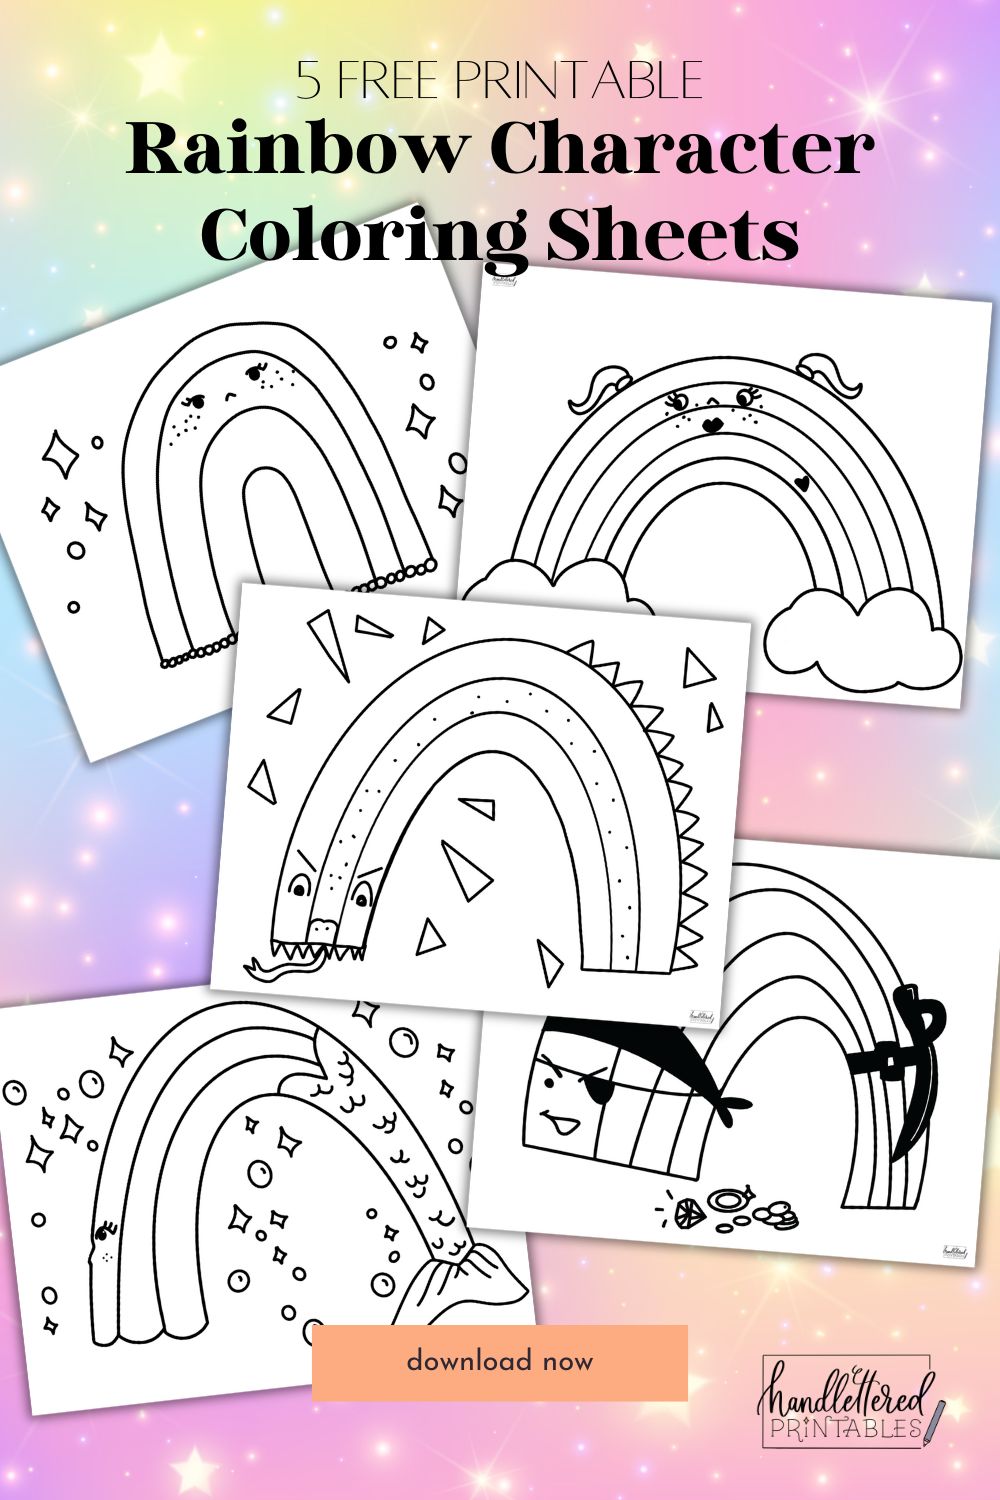 Text reads: 5 free printable rainbow characters coloring sheets image shows all 5 coloring sheets overlayed on a rainbow background with stars. download now button at the bottom of the page. characters include basic rainbow with face, girl with pigtails rainnbow, dragon rainbow, pirate rainbow and mermaid rainbow